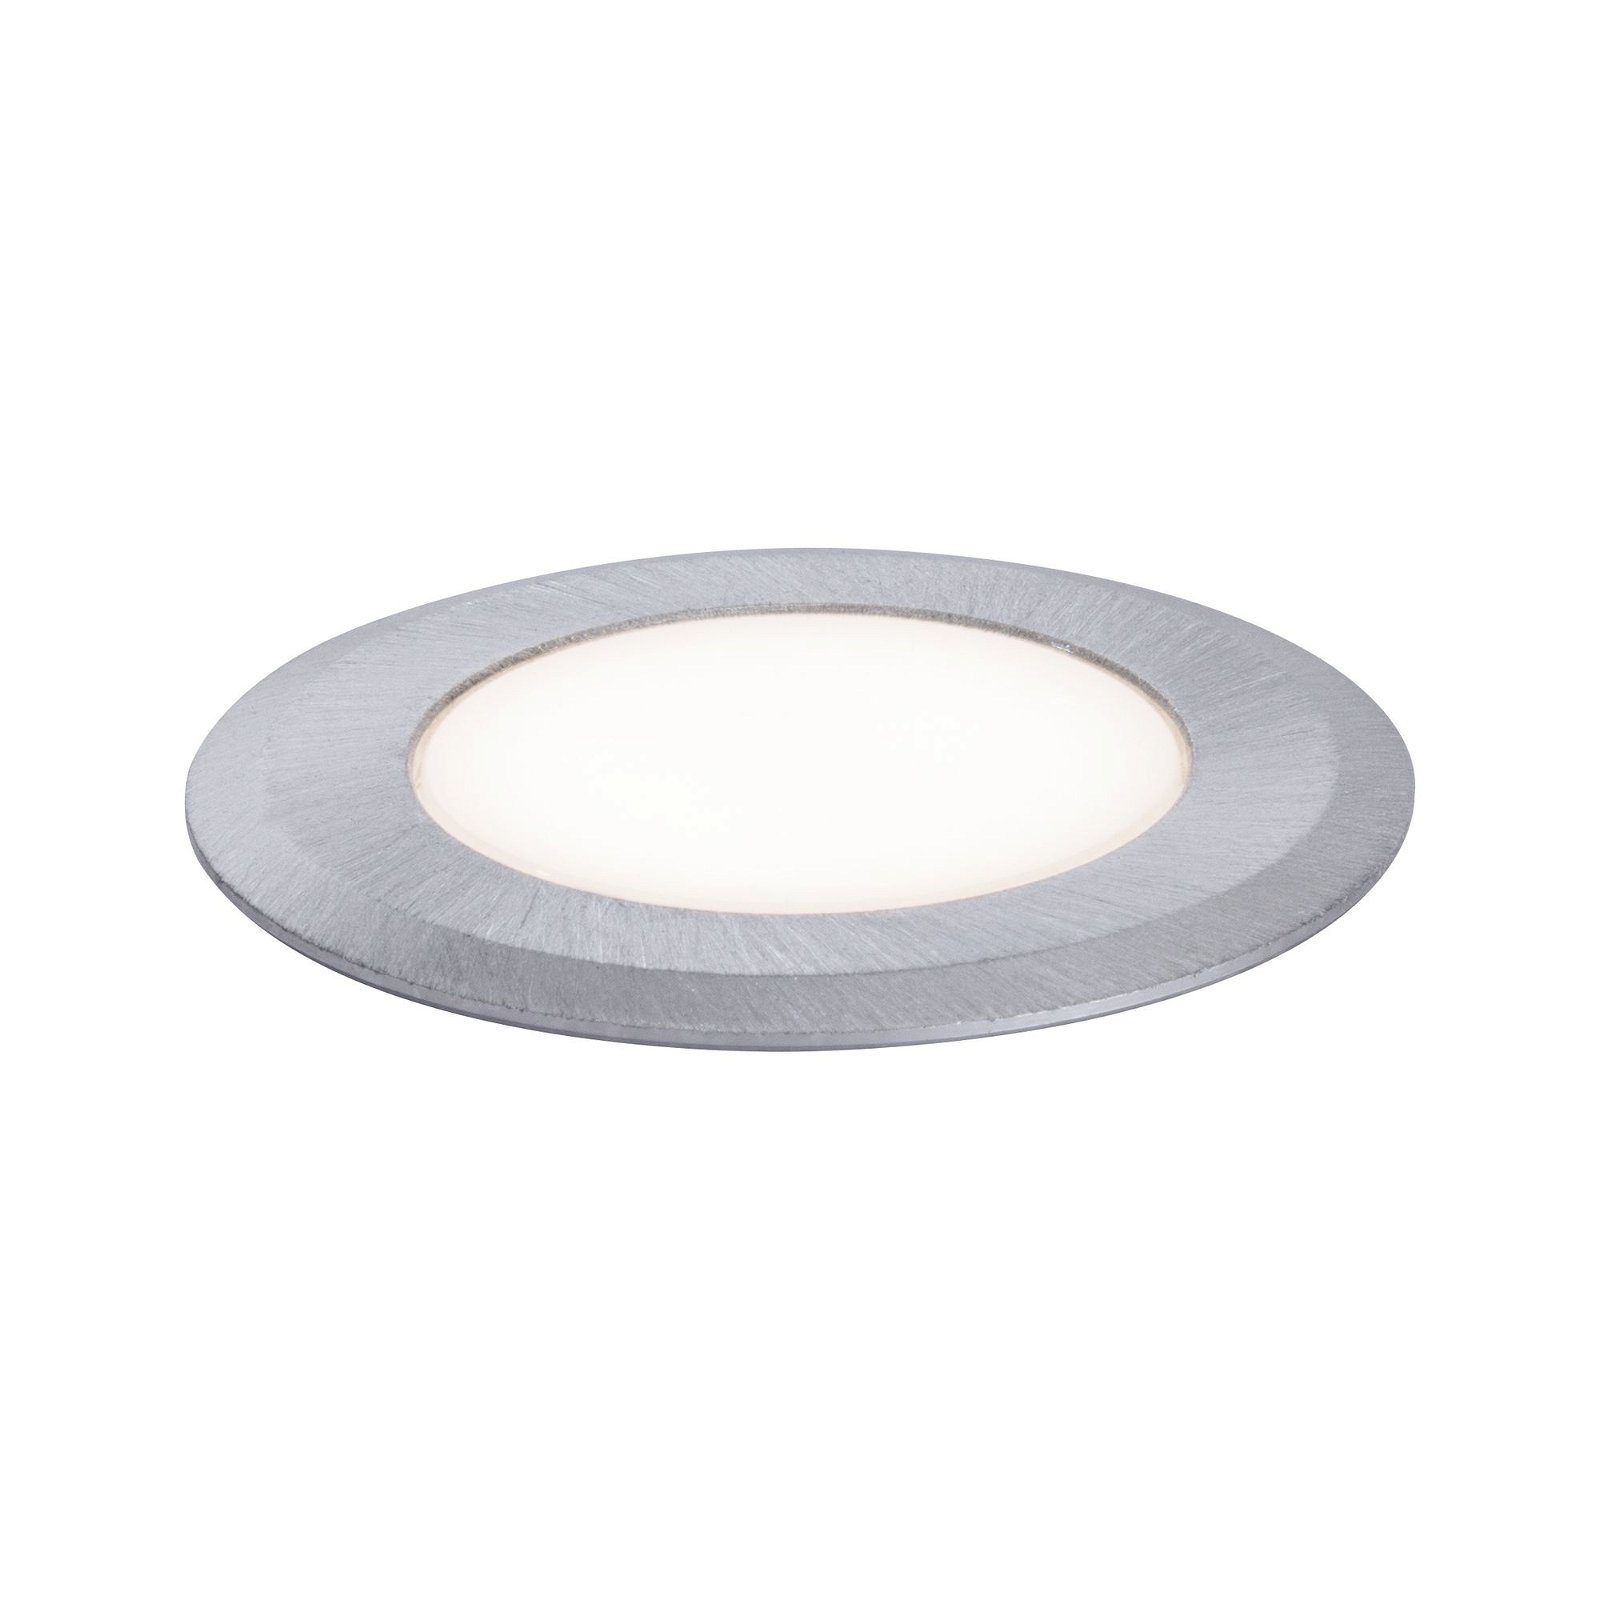 House LED Recessed floor luminaire IP65 round 50mm 3000K 2W 60lm 230V Semi-crown gold Stainless steel/Plastic